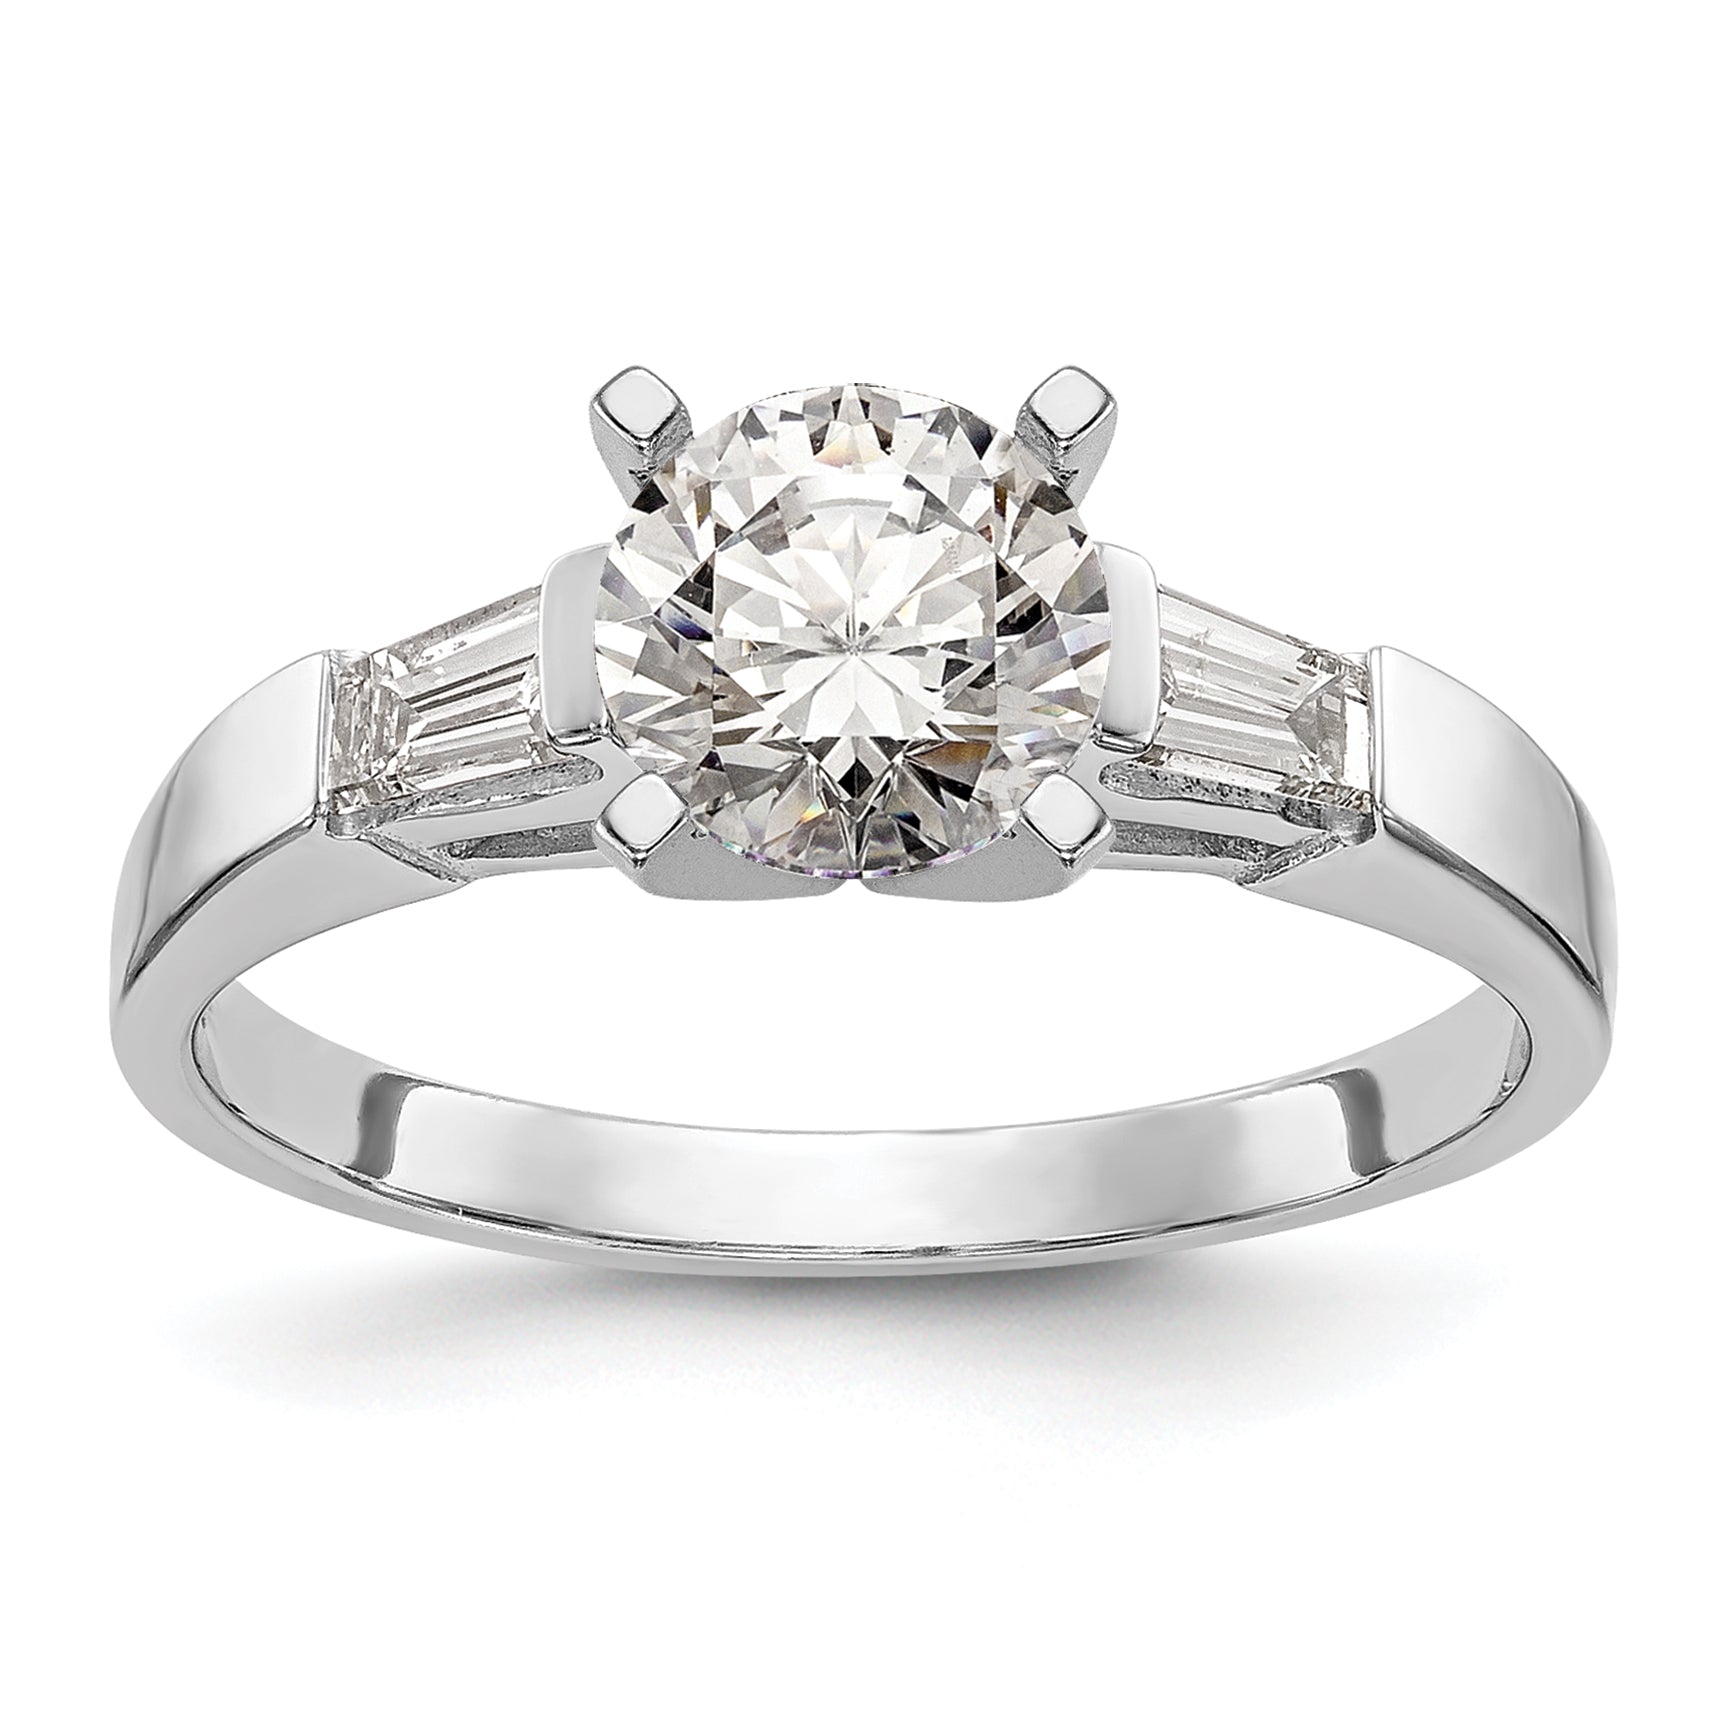 Image of ID 1 027ct CZ Solid Real 14K White Gold 3-Stone Peg Set Semi mount Engagement Ring